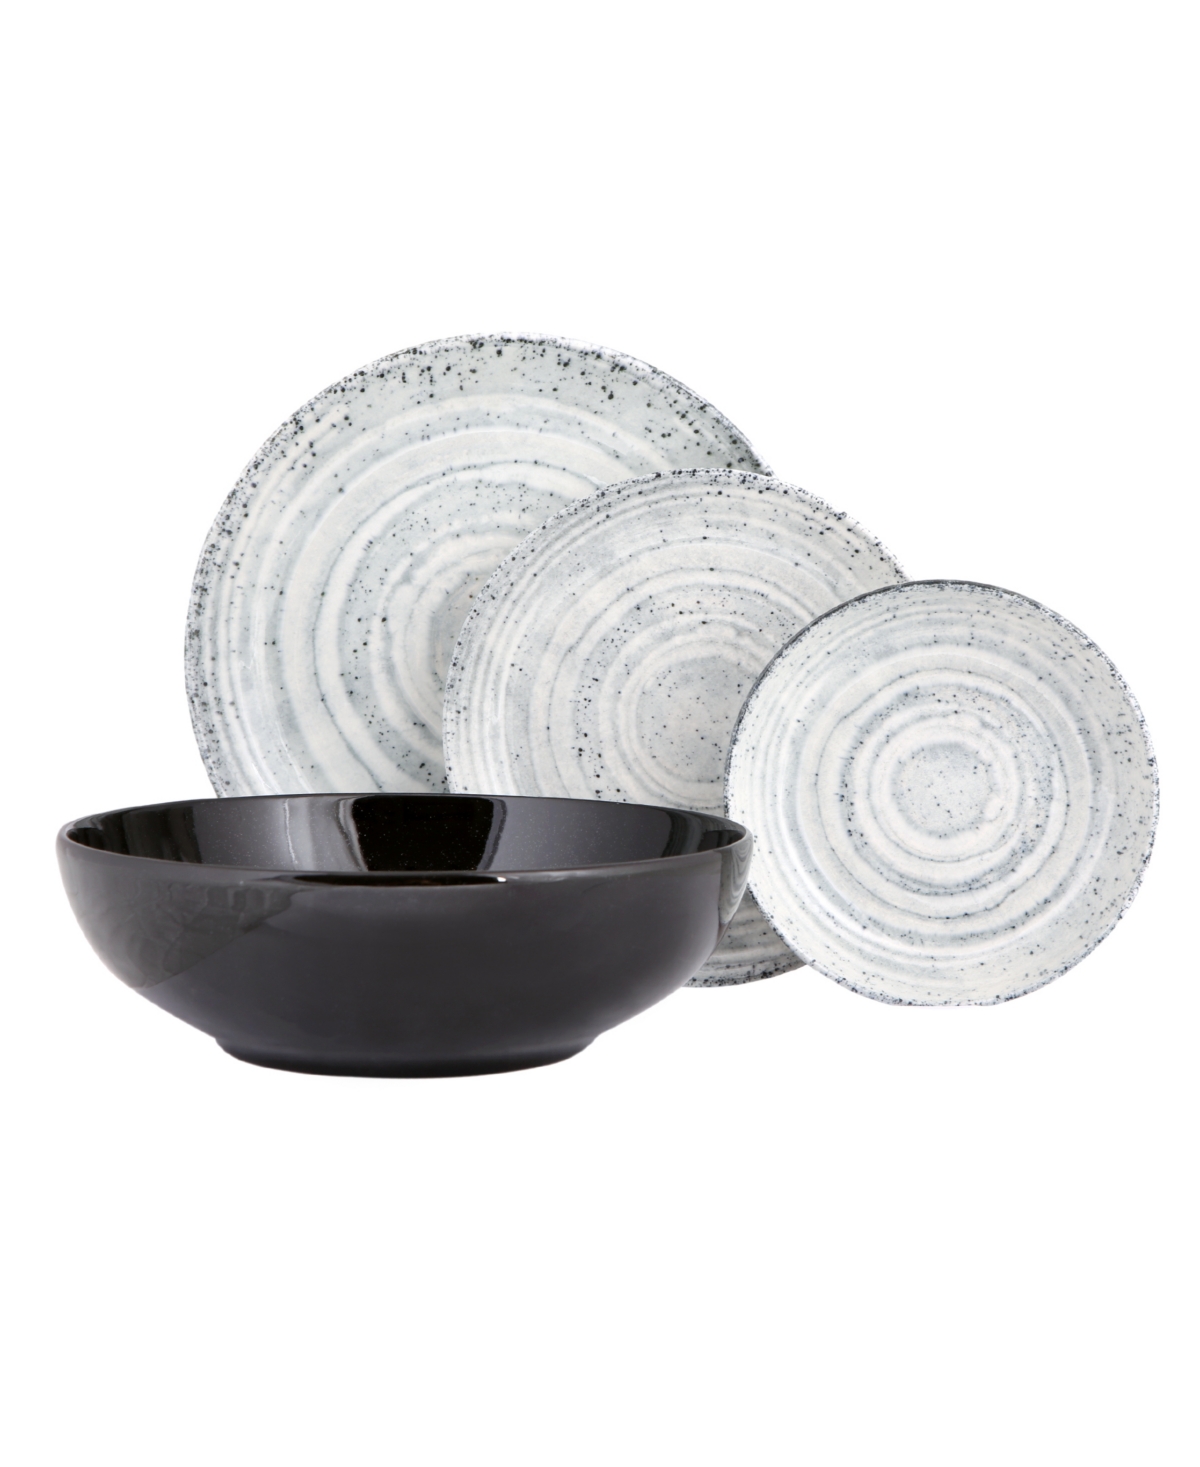 New Age Natura 4-Piece Place Setting Set - Gray and White